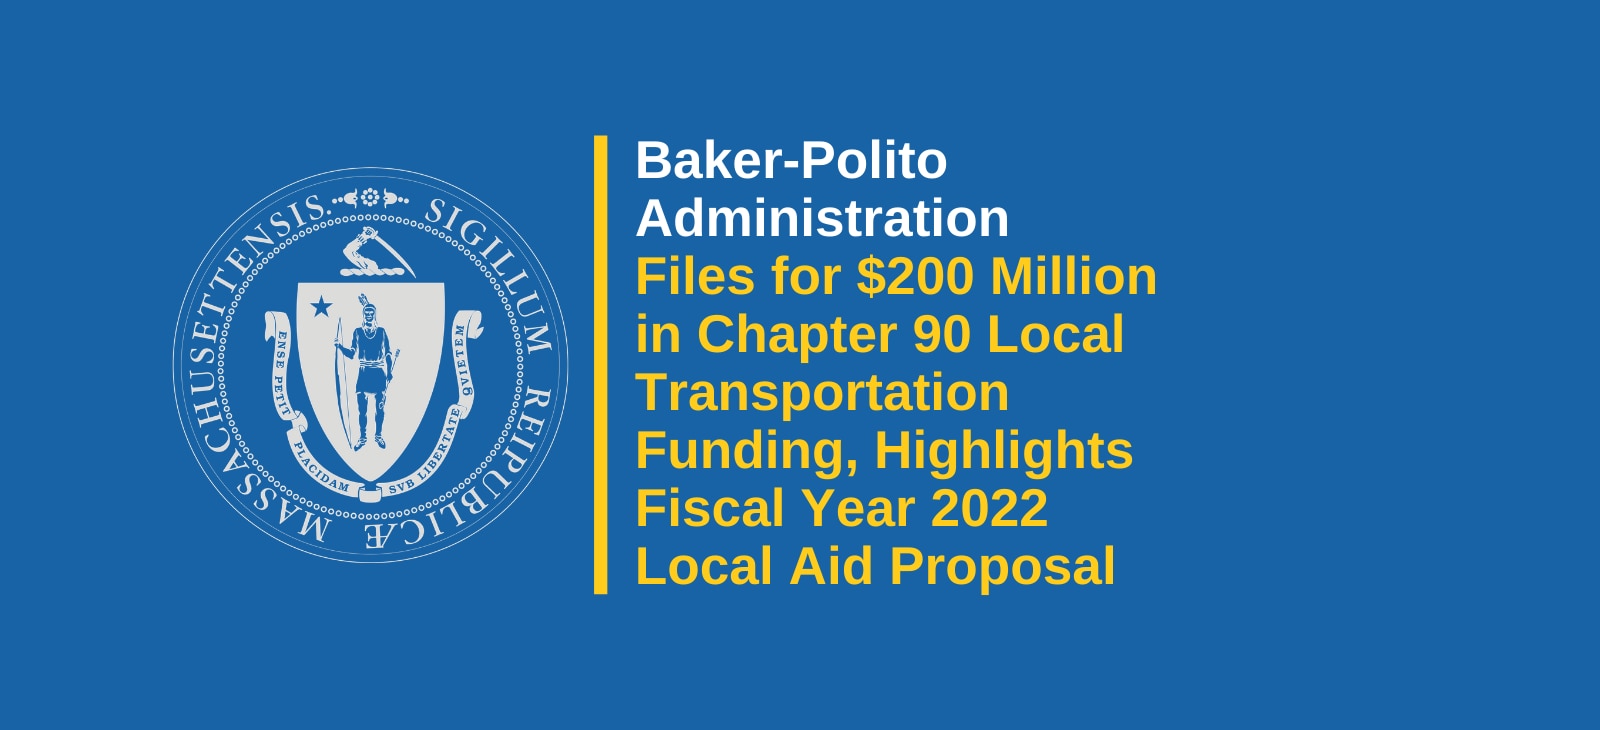 Baker-Polito Administration Files for $200 Million in Chapter 90 Local Transportation Funding, Highlights Fiscal Year 2022 Local Aid Proposal